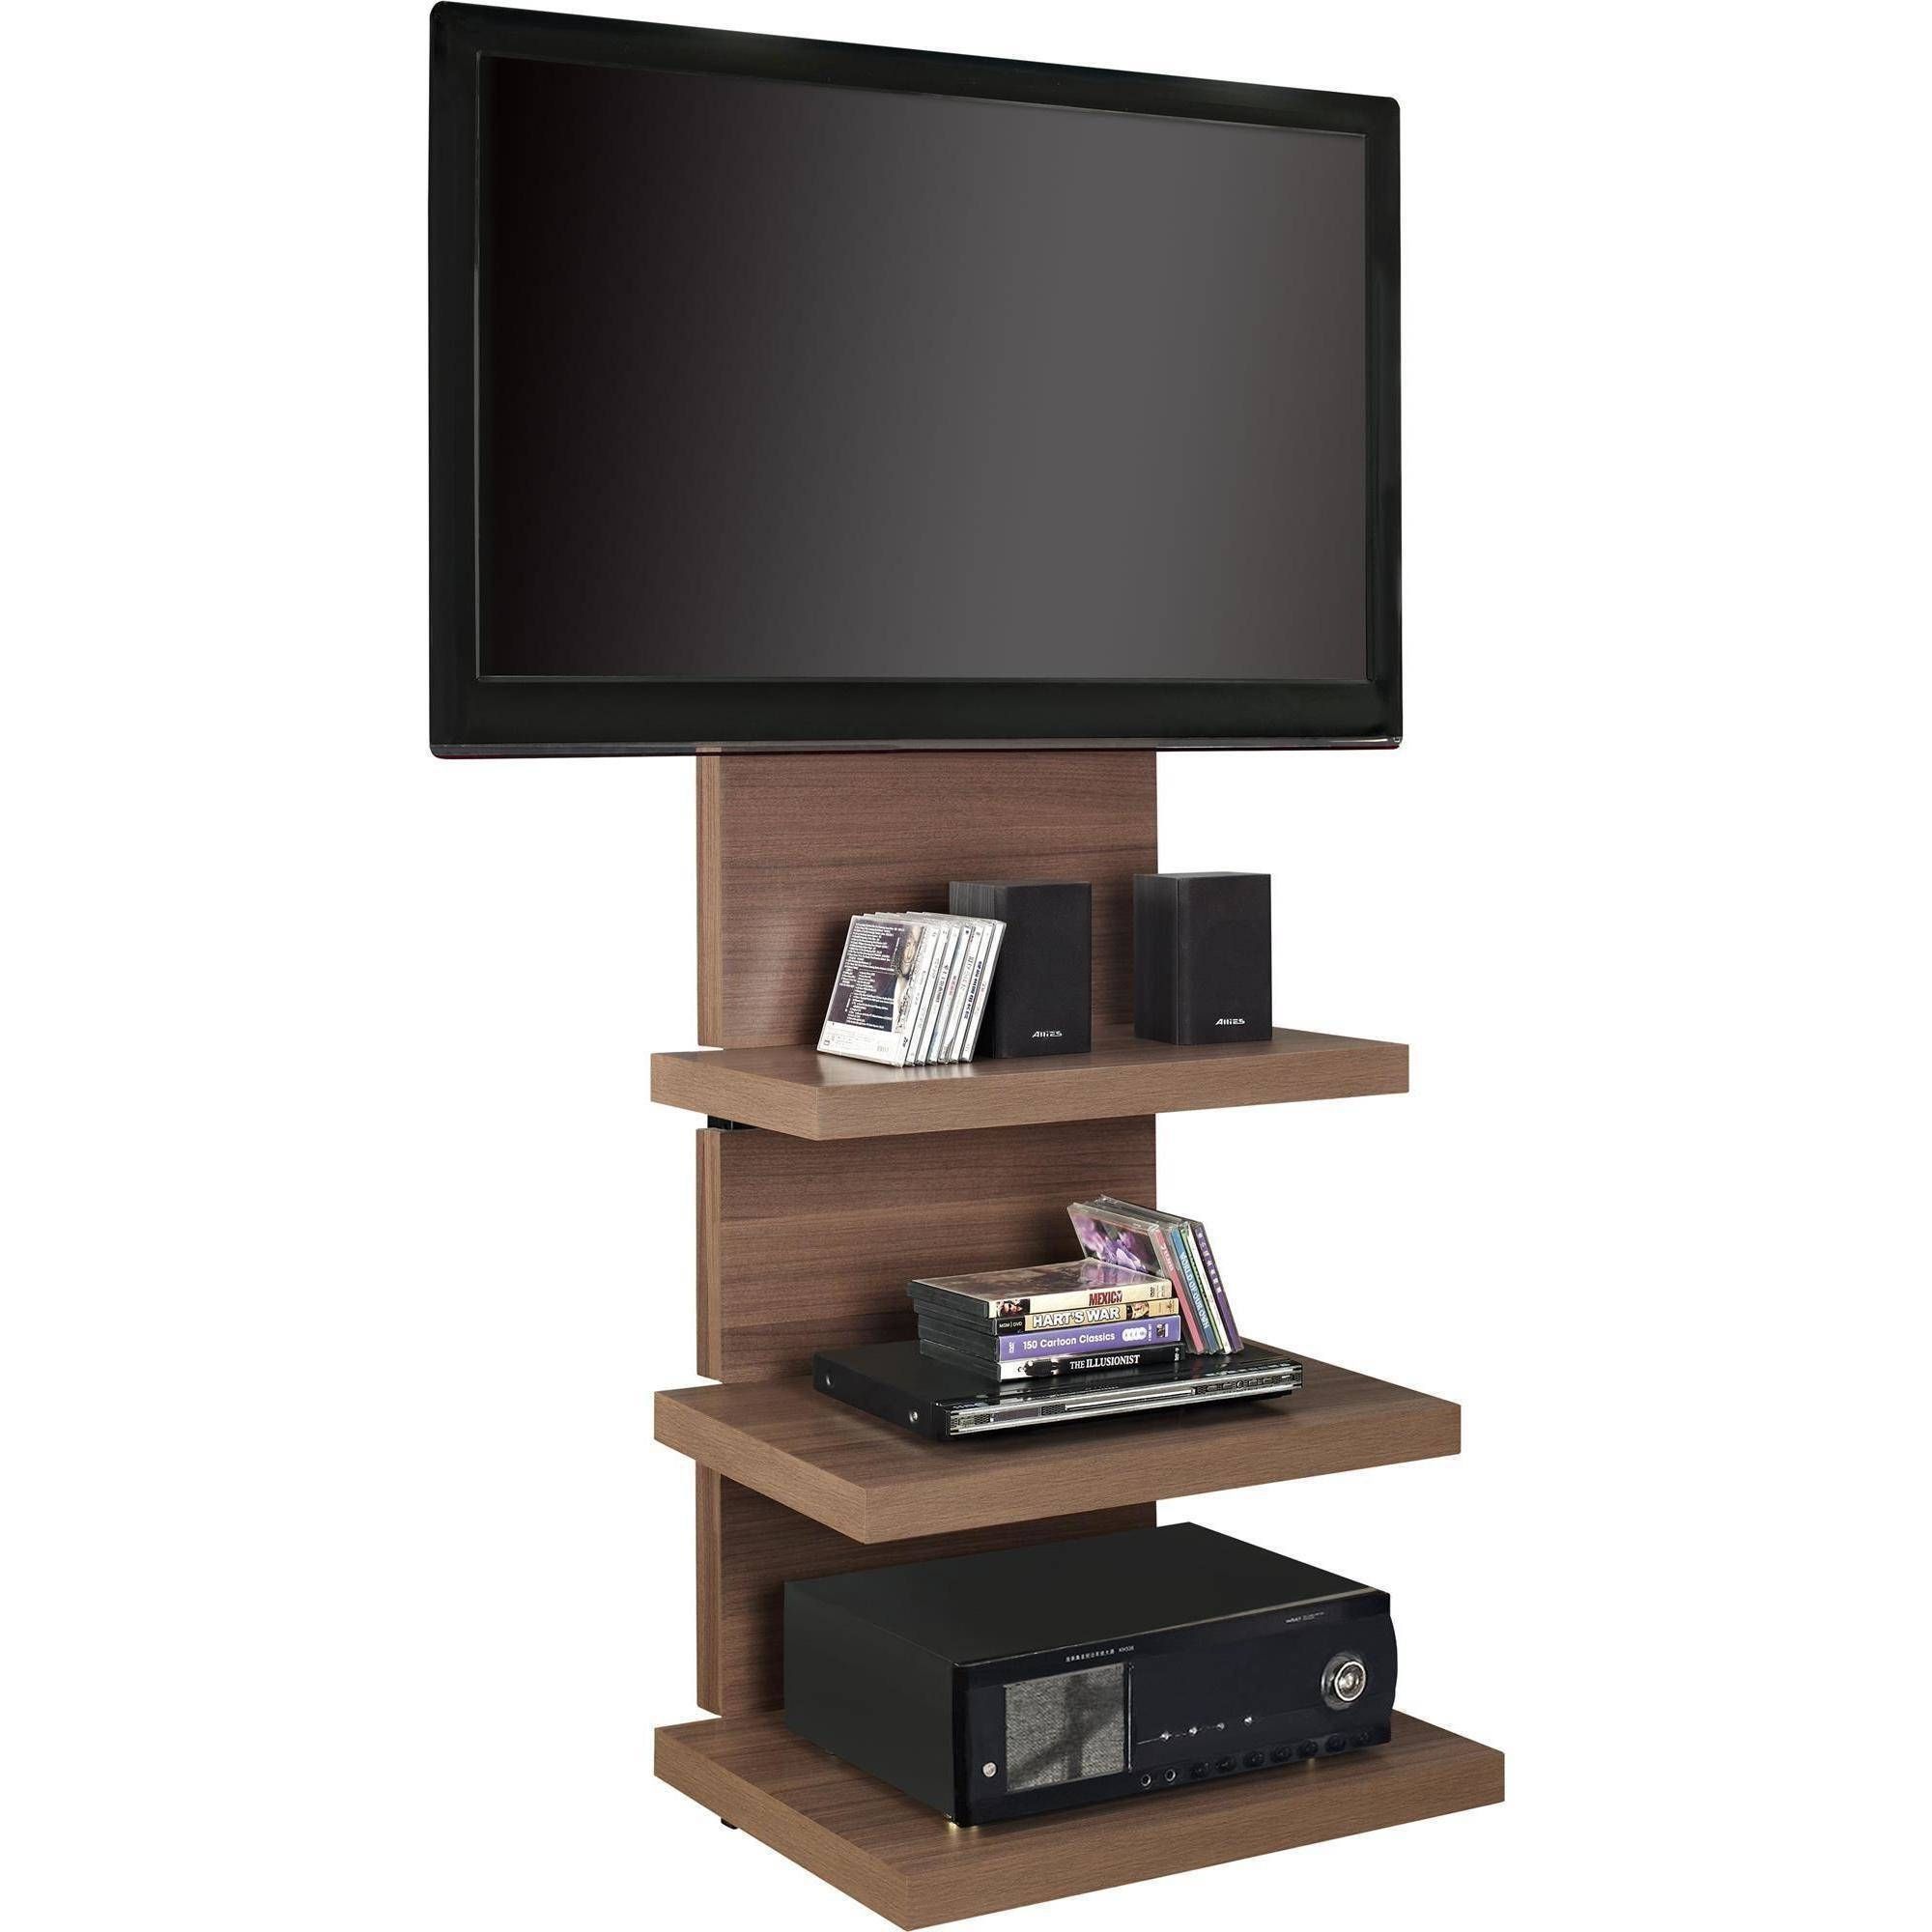 Ameriwood Home Elevation Altramount Tv Stand For Tvs Up To 60 Intended For Tv Stand With Mount (View 4 of 15)